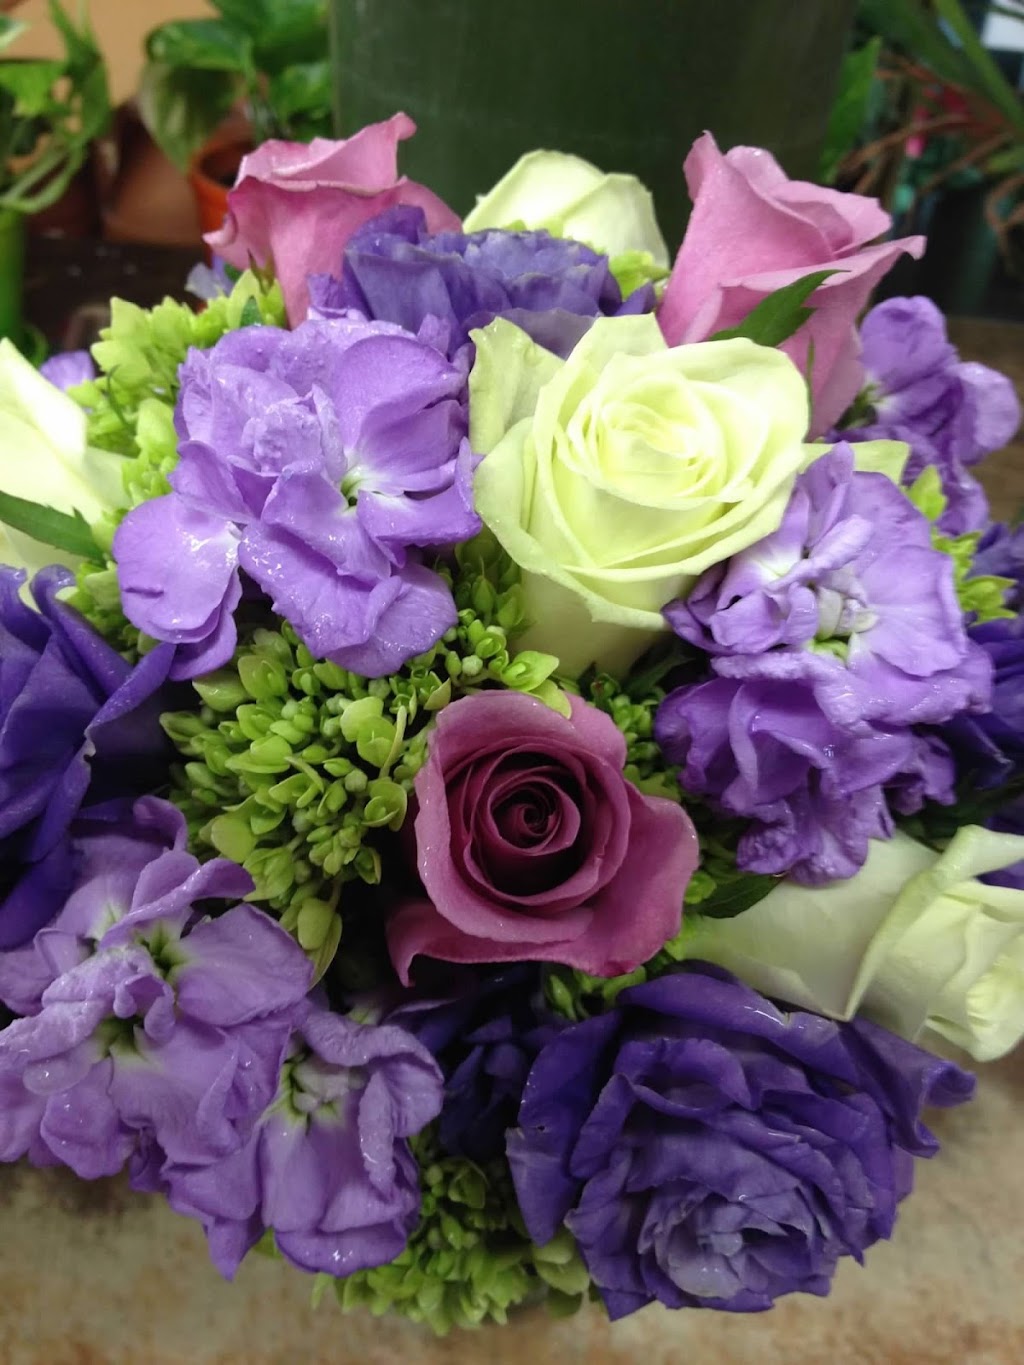 Wards Florist & Greenhouse | 53 Cabot St, Beverly, MA 01915 | Phone: (978) 922-0032